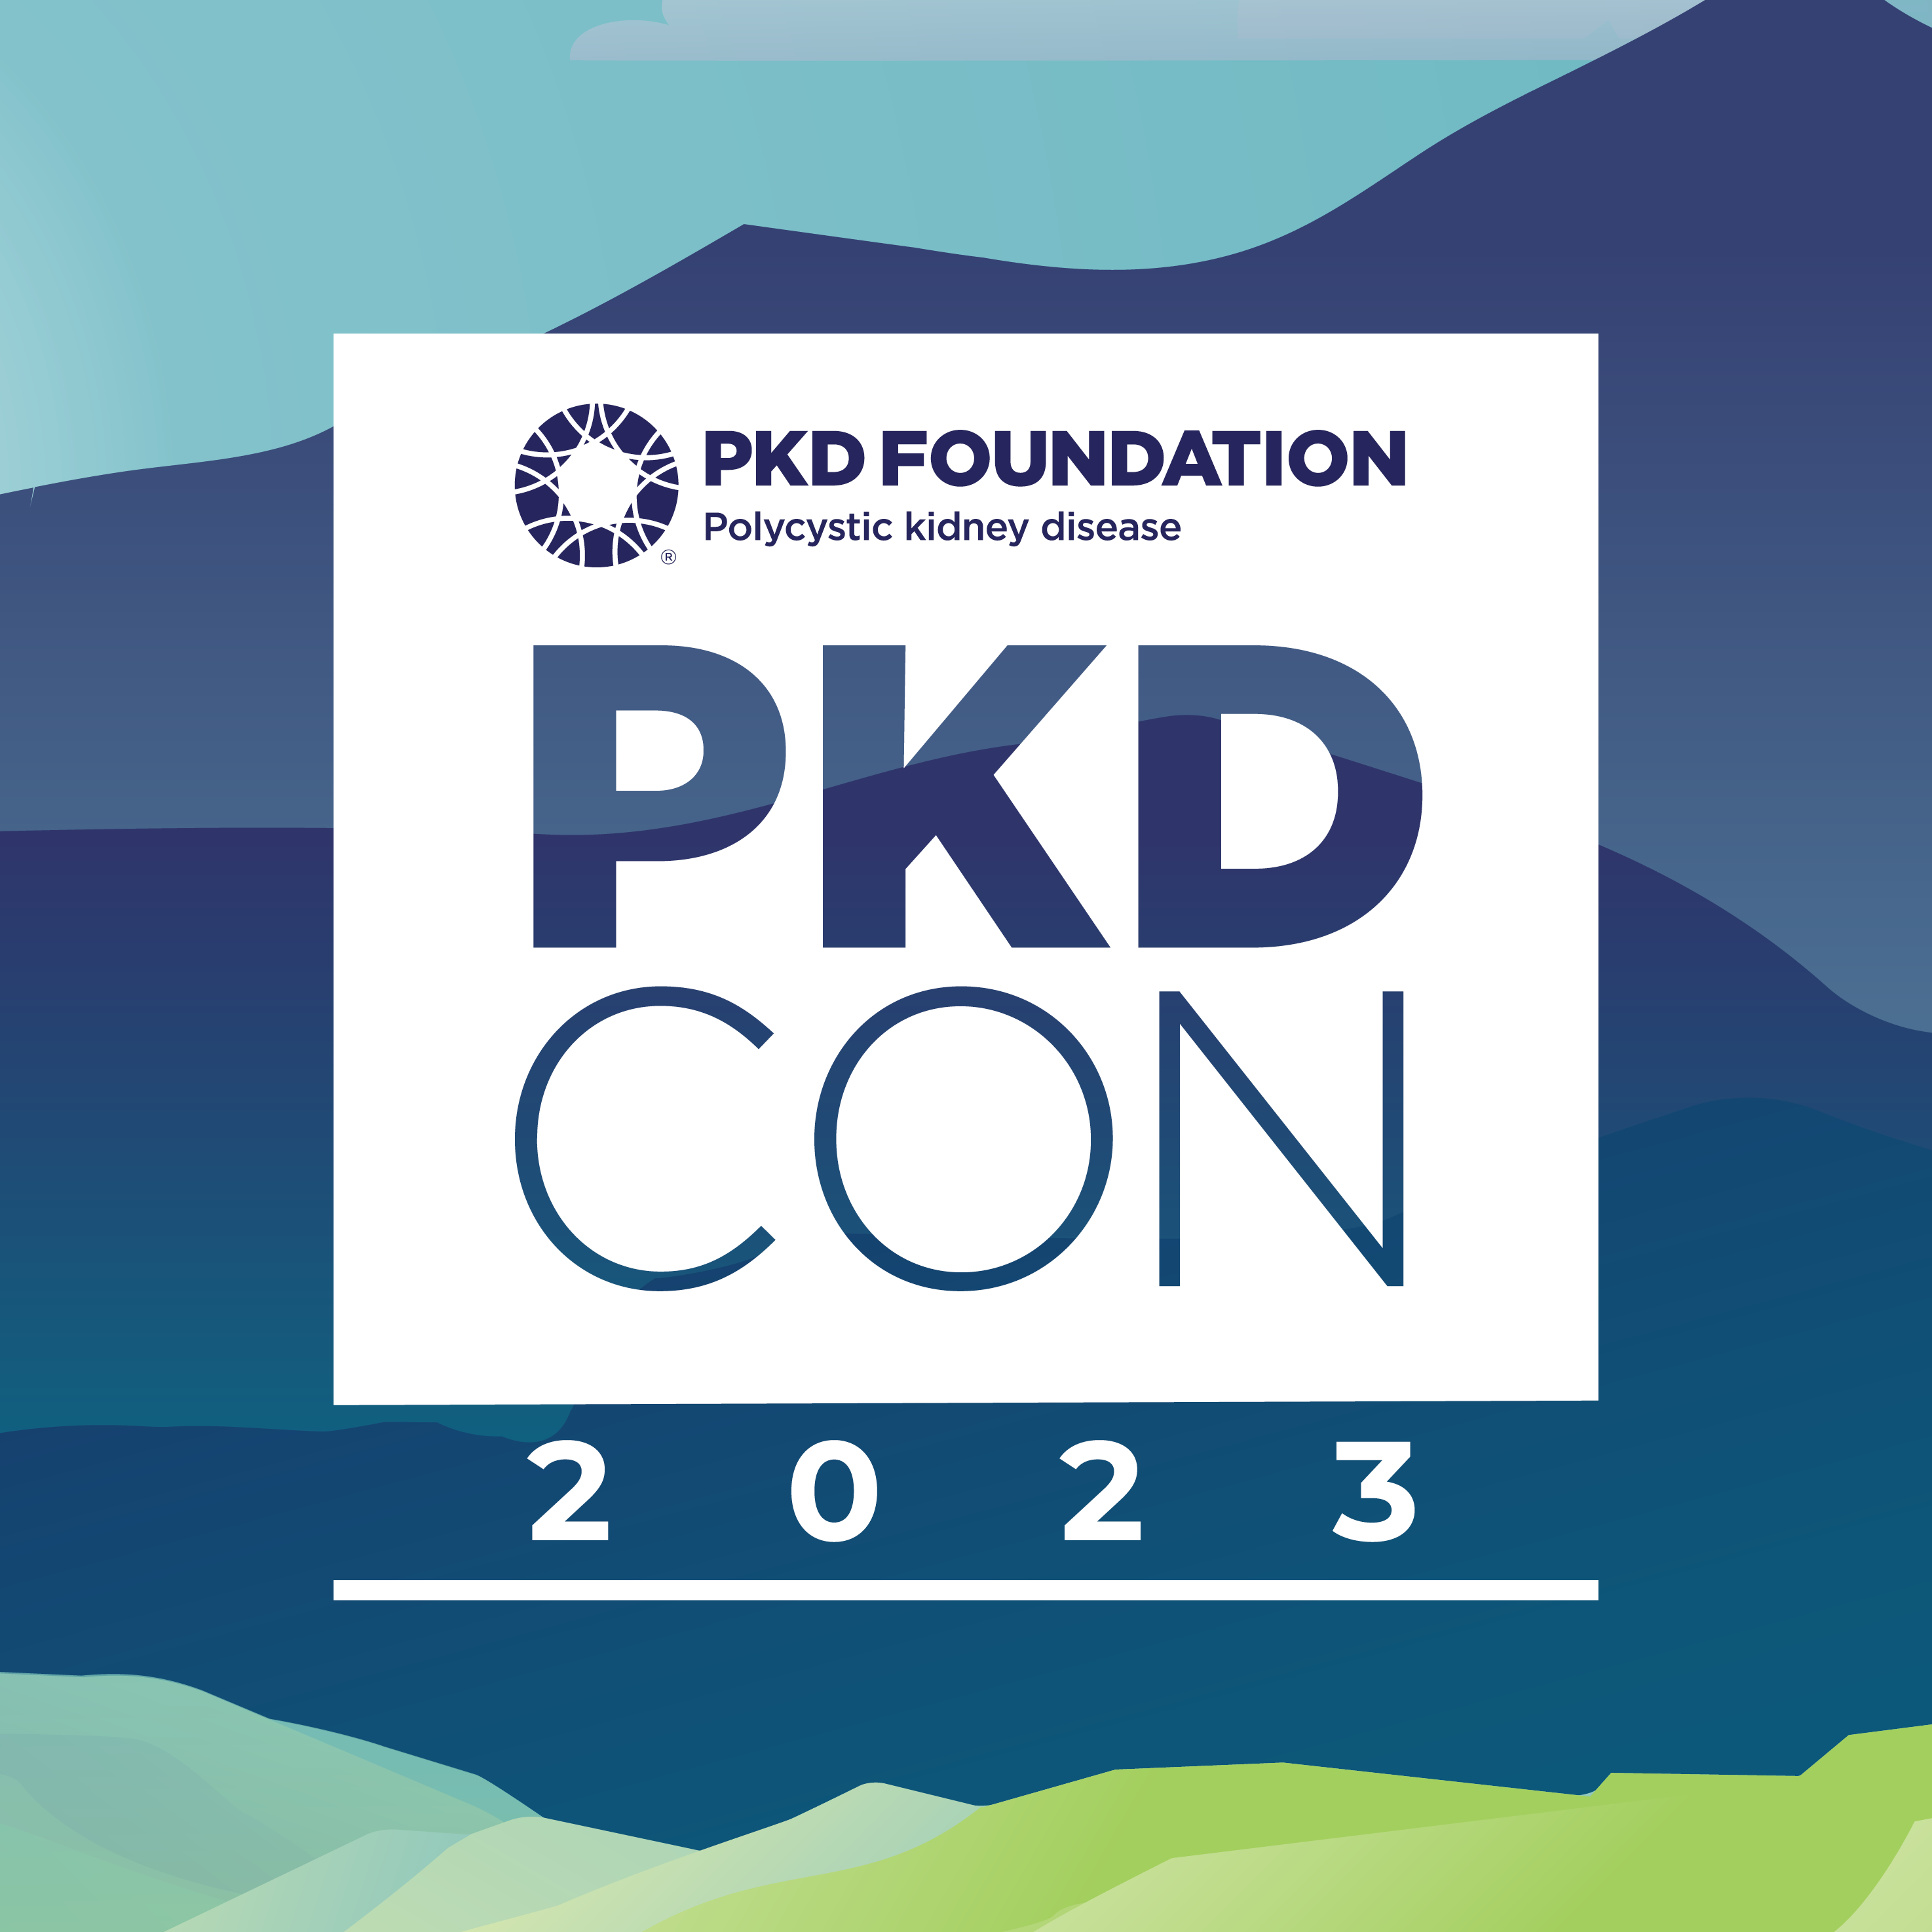 abbreviated lockup of PKD Connect Conference 2023 (PKDCON 2023) with PKD Foundation logo and illustration of Denver Colorado mountains